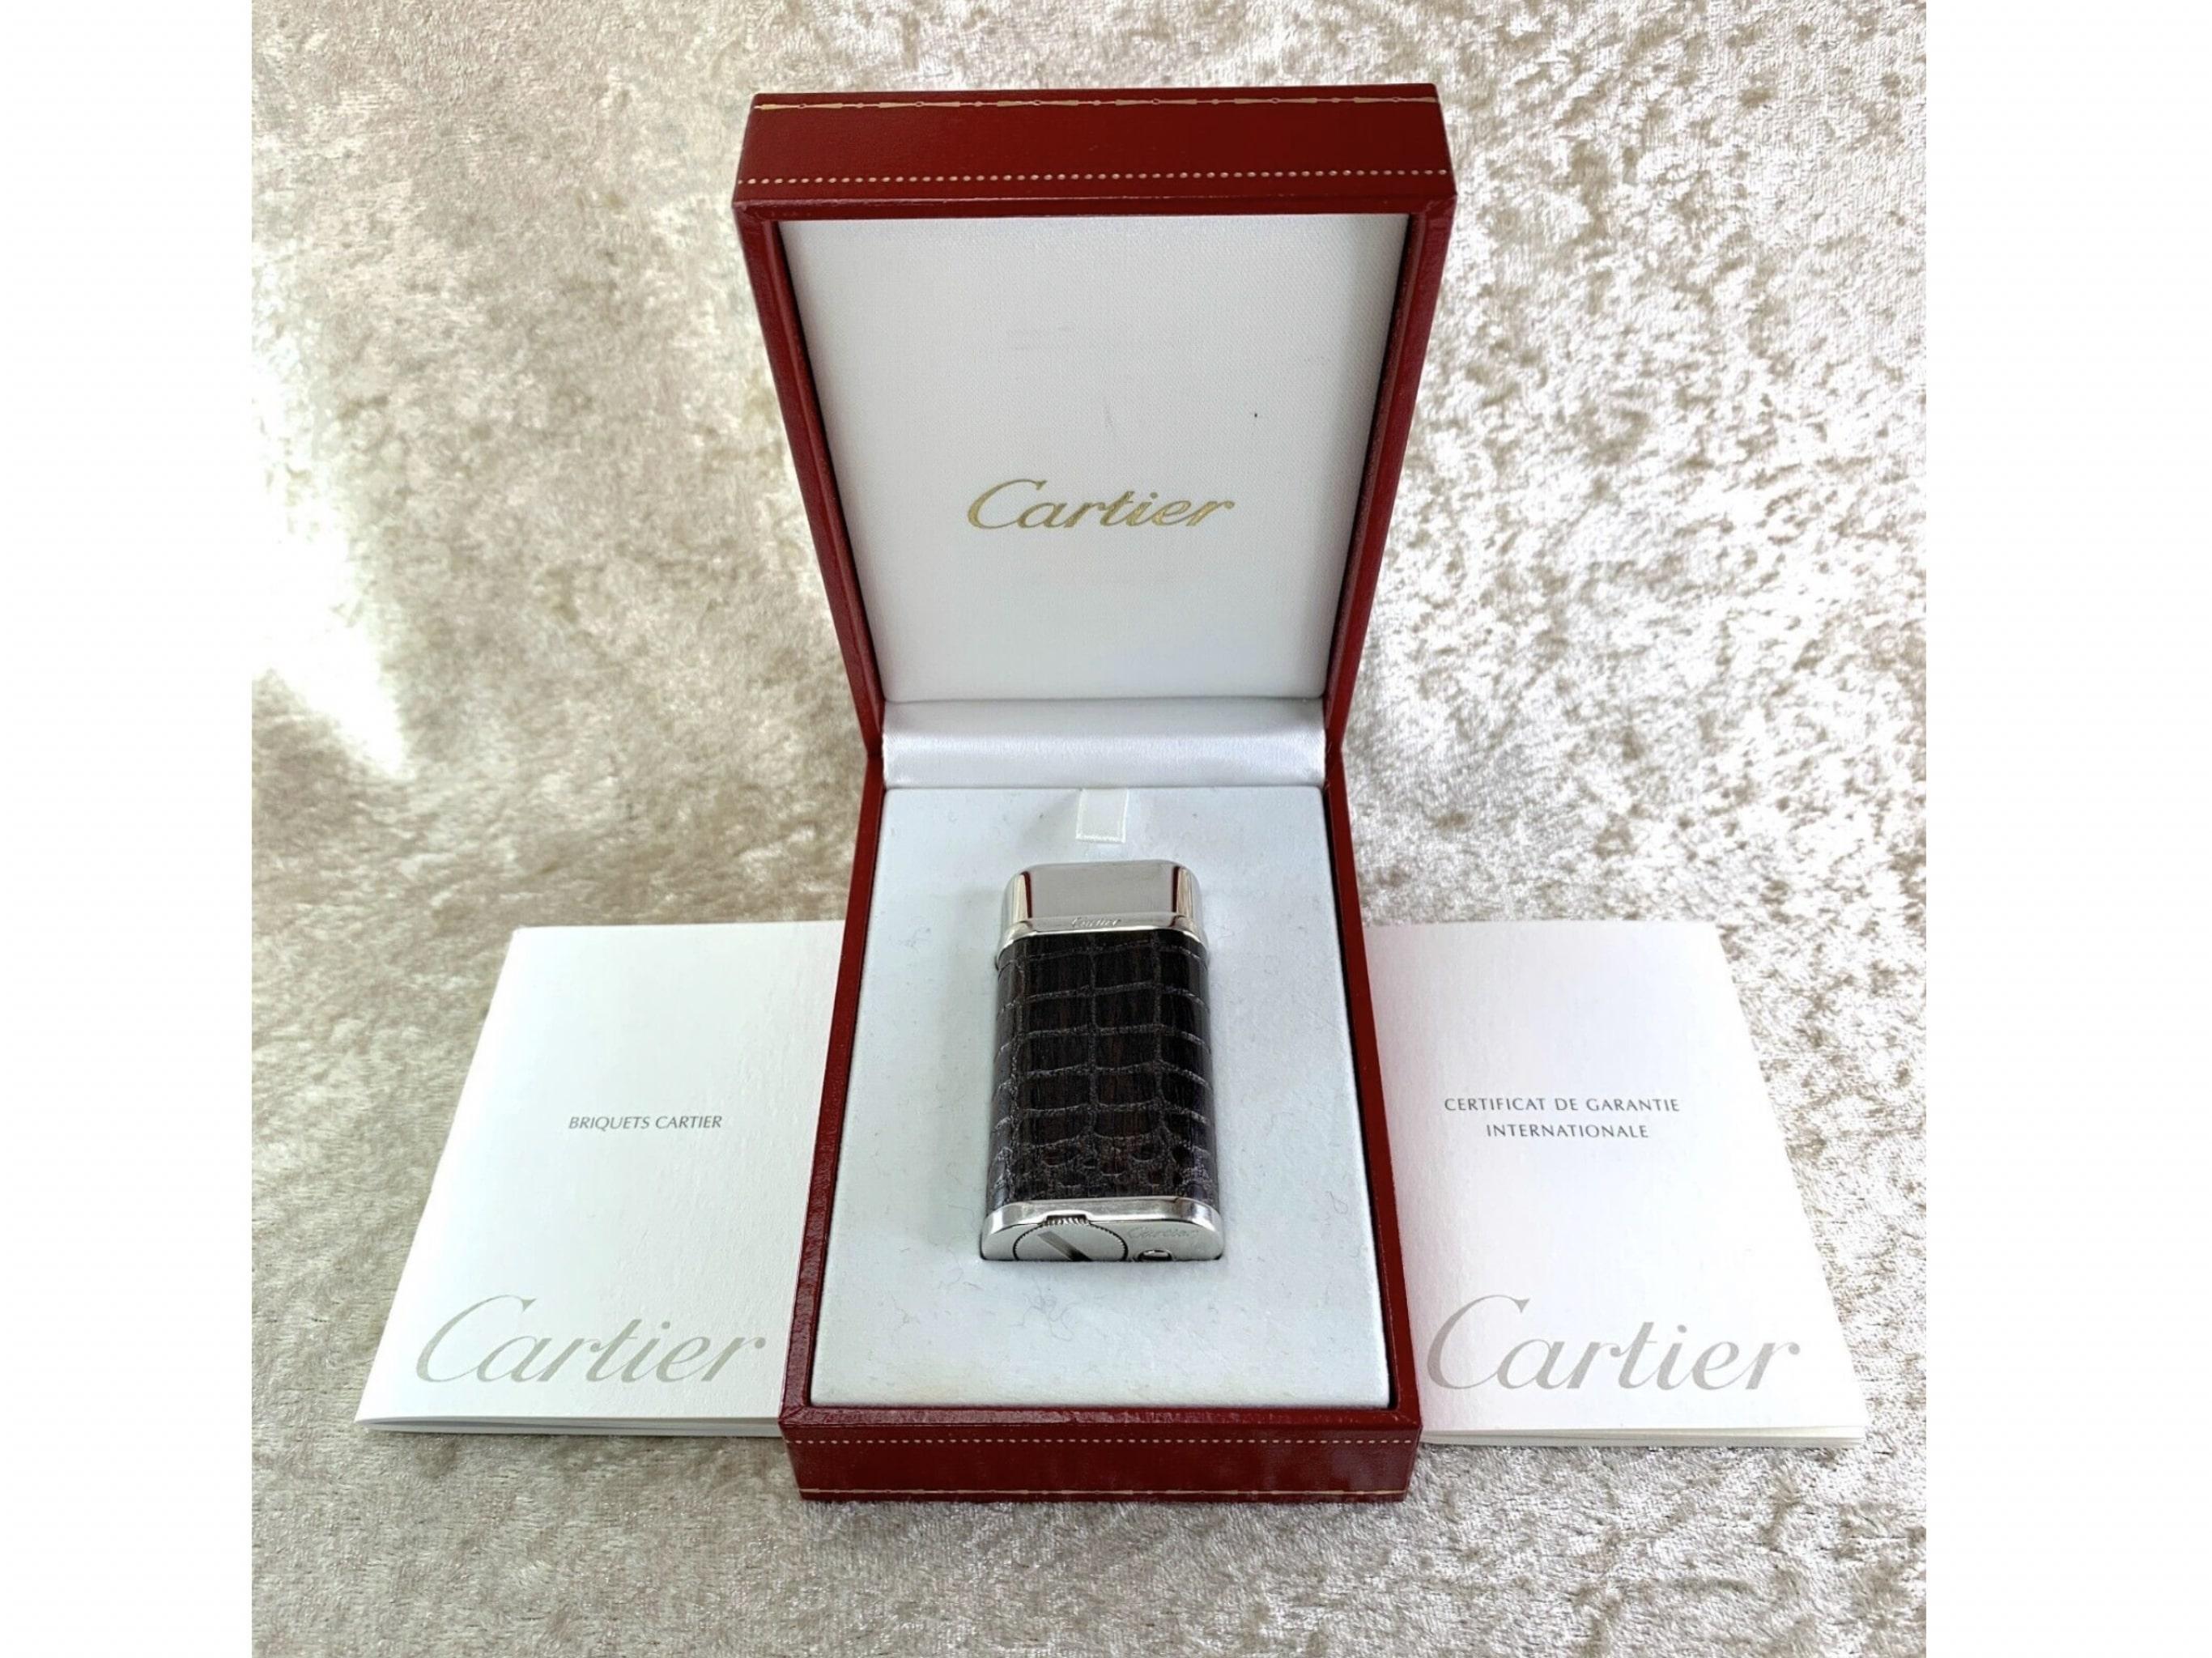 Rare Cartier Lighter Crocodile Skin Pattern Engraved 
In rare condition 
This Cartier lighter comes with original case and papers 
Authentic Cartier Gas Lighter 
Excellent looking working condition
The size 60 x 30 x 12 mm
Color - Silver
